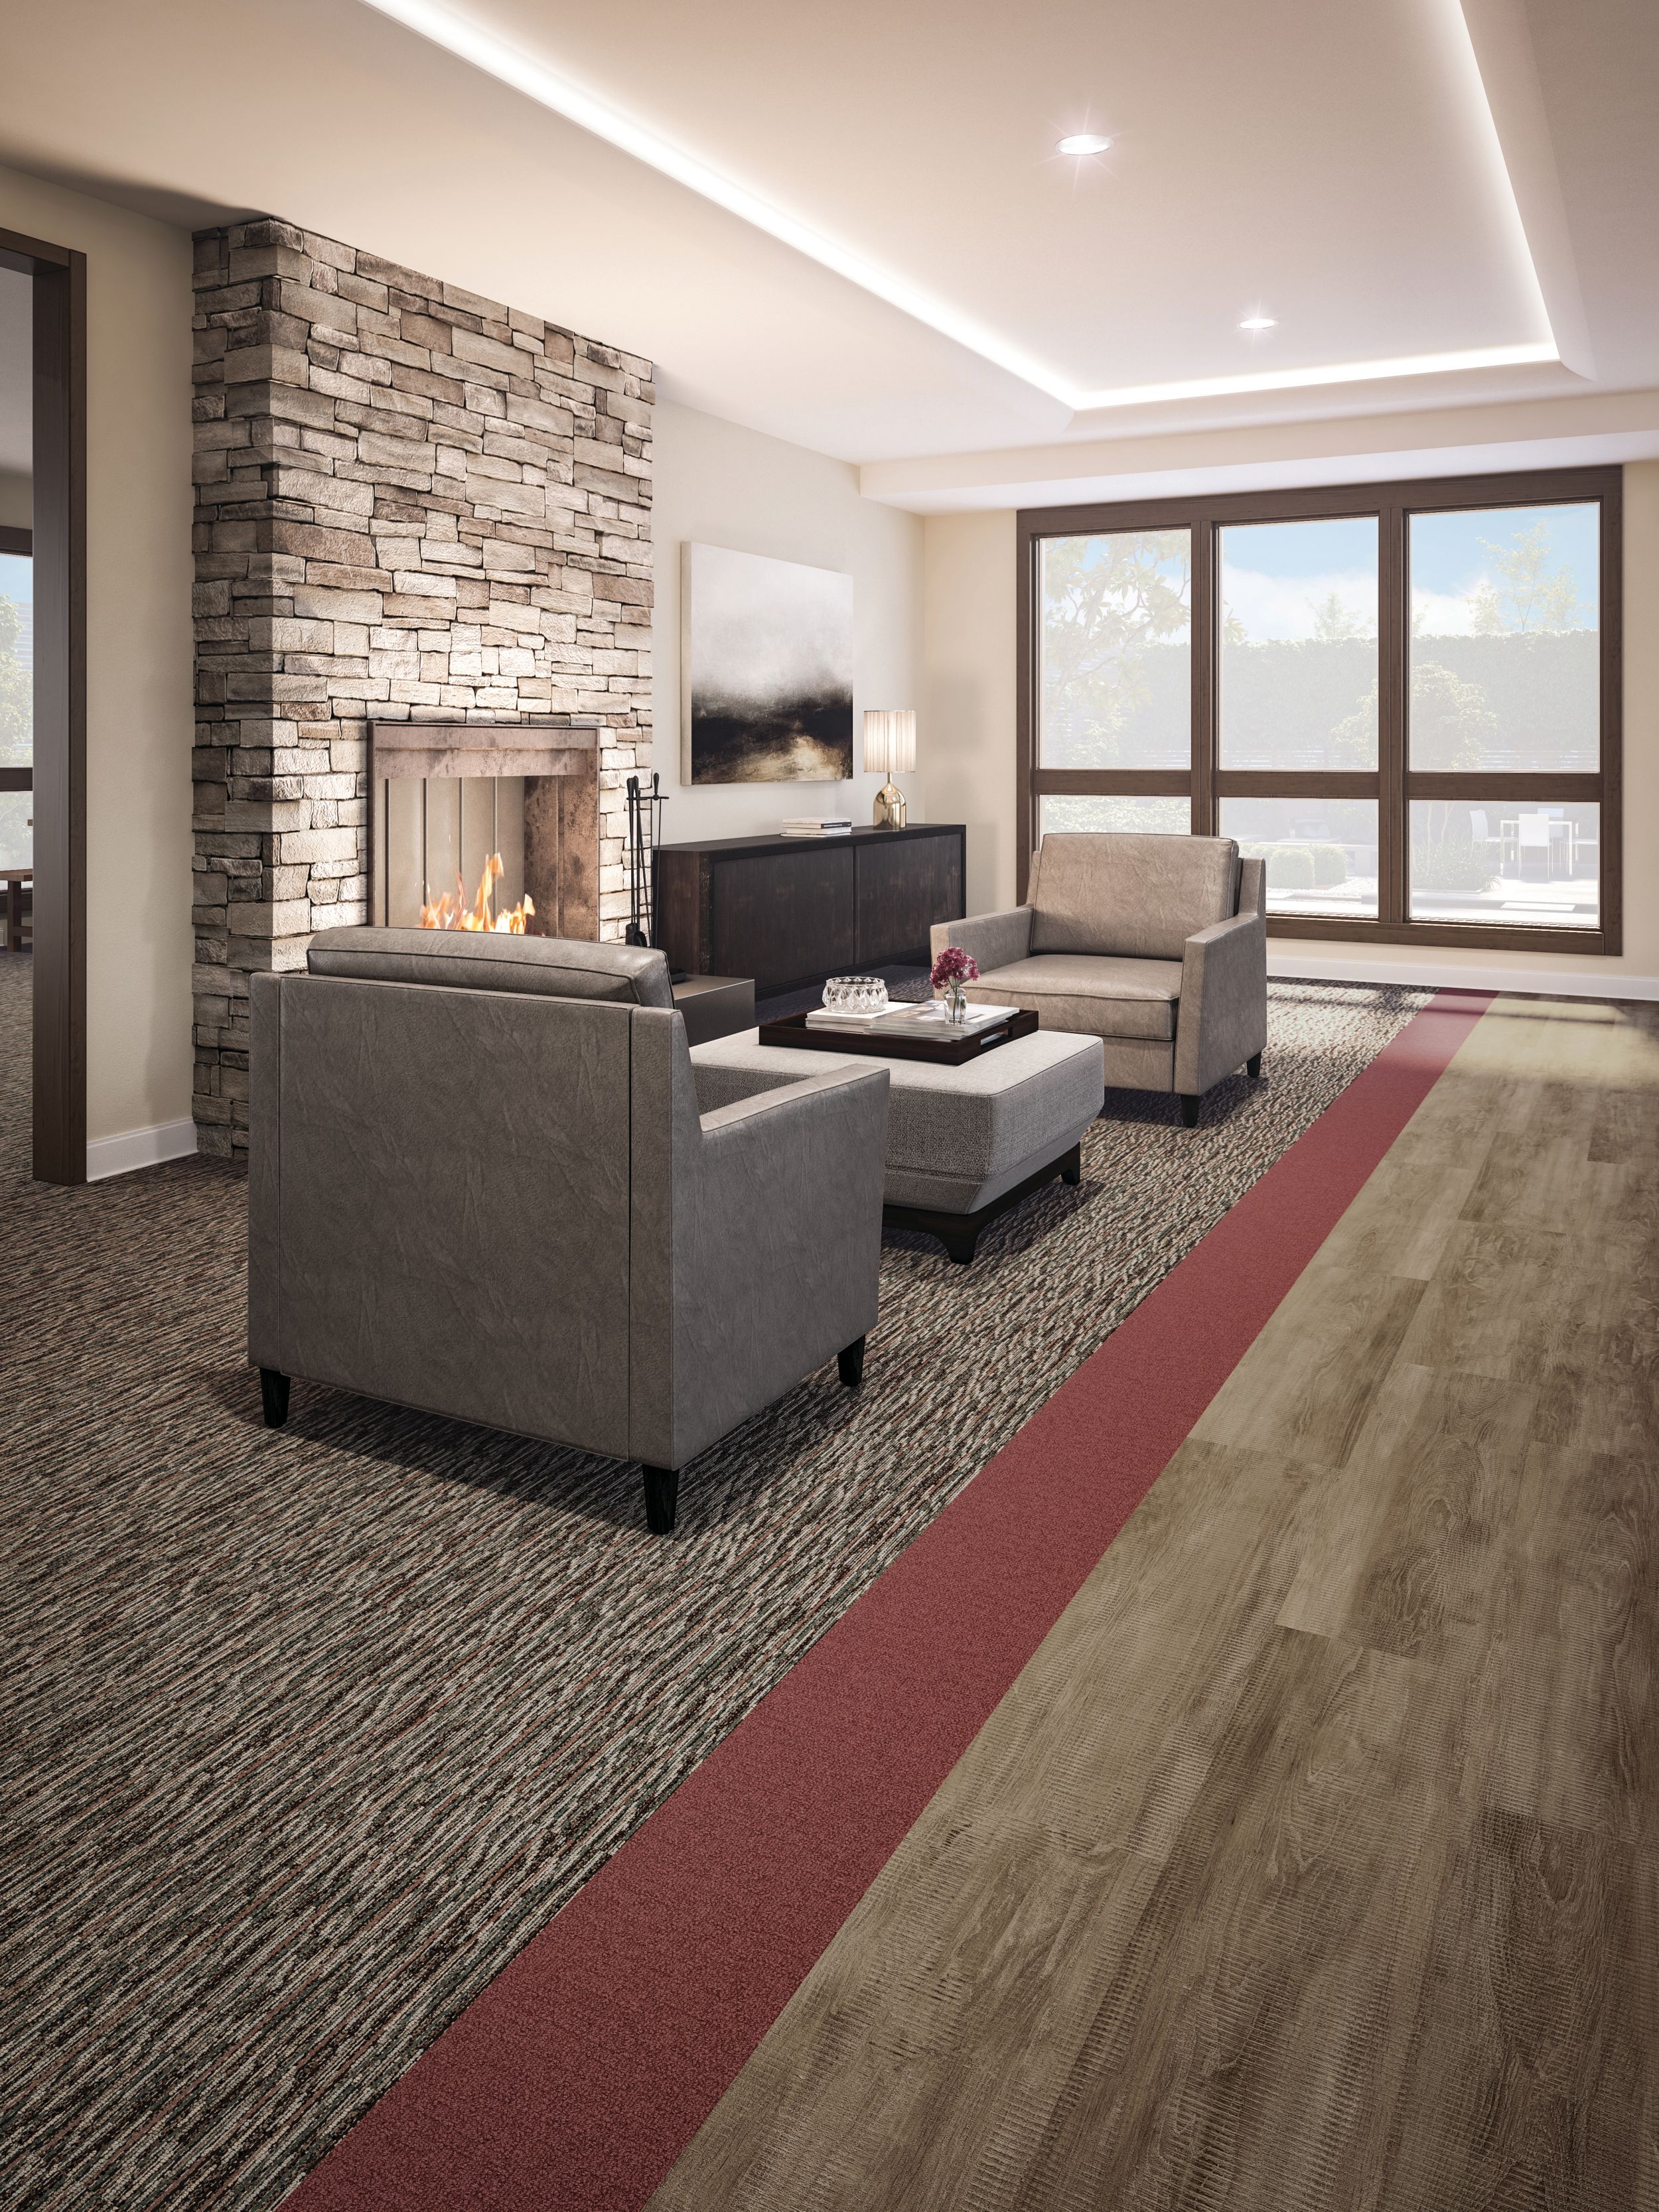 Interface Farmland and Monochrome carpet tile with Textured Woodograins LVT in senior housing seating area with stone fireplace numéro d’image 12